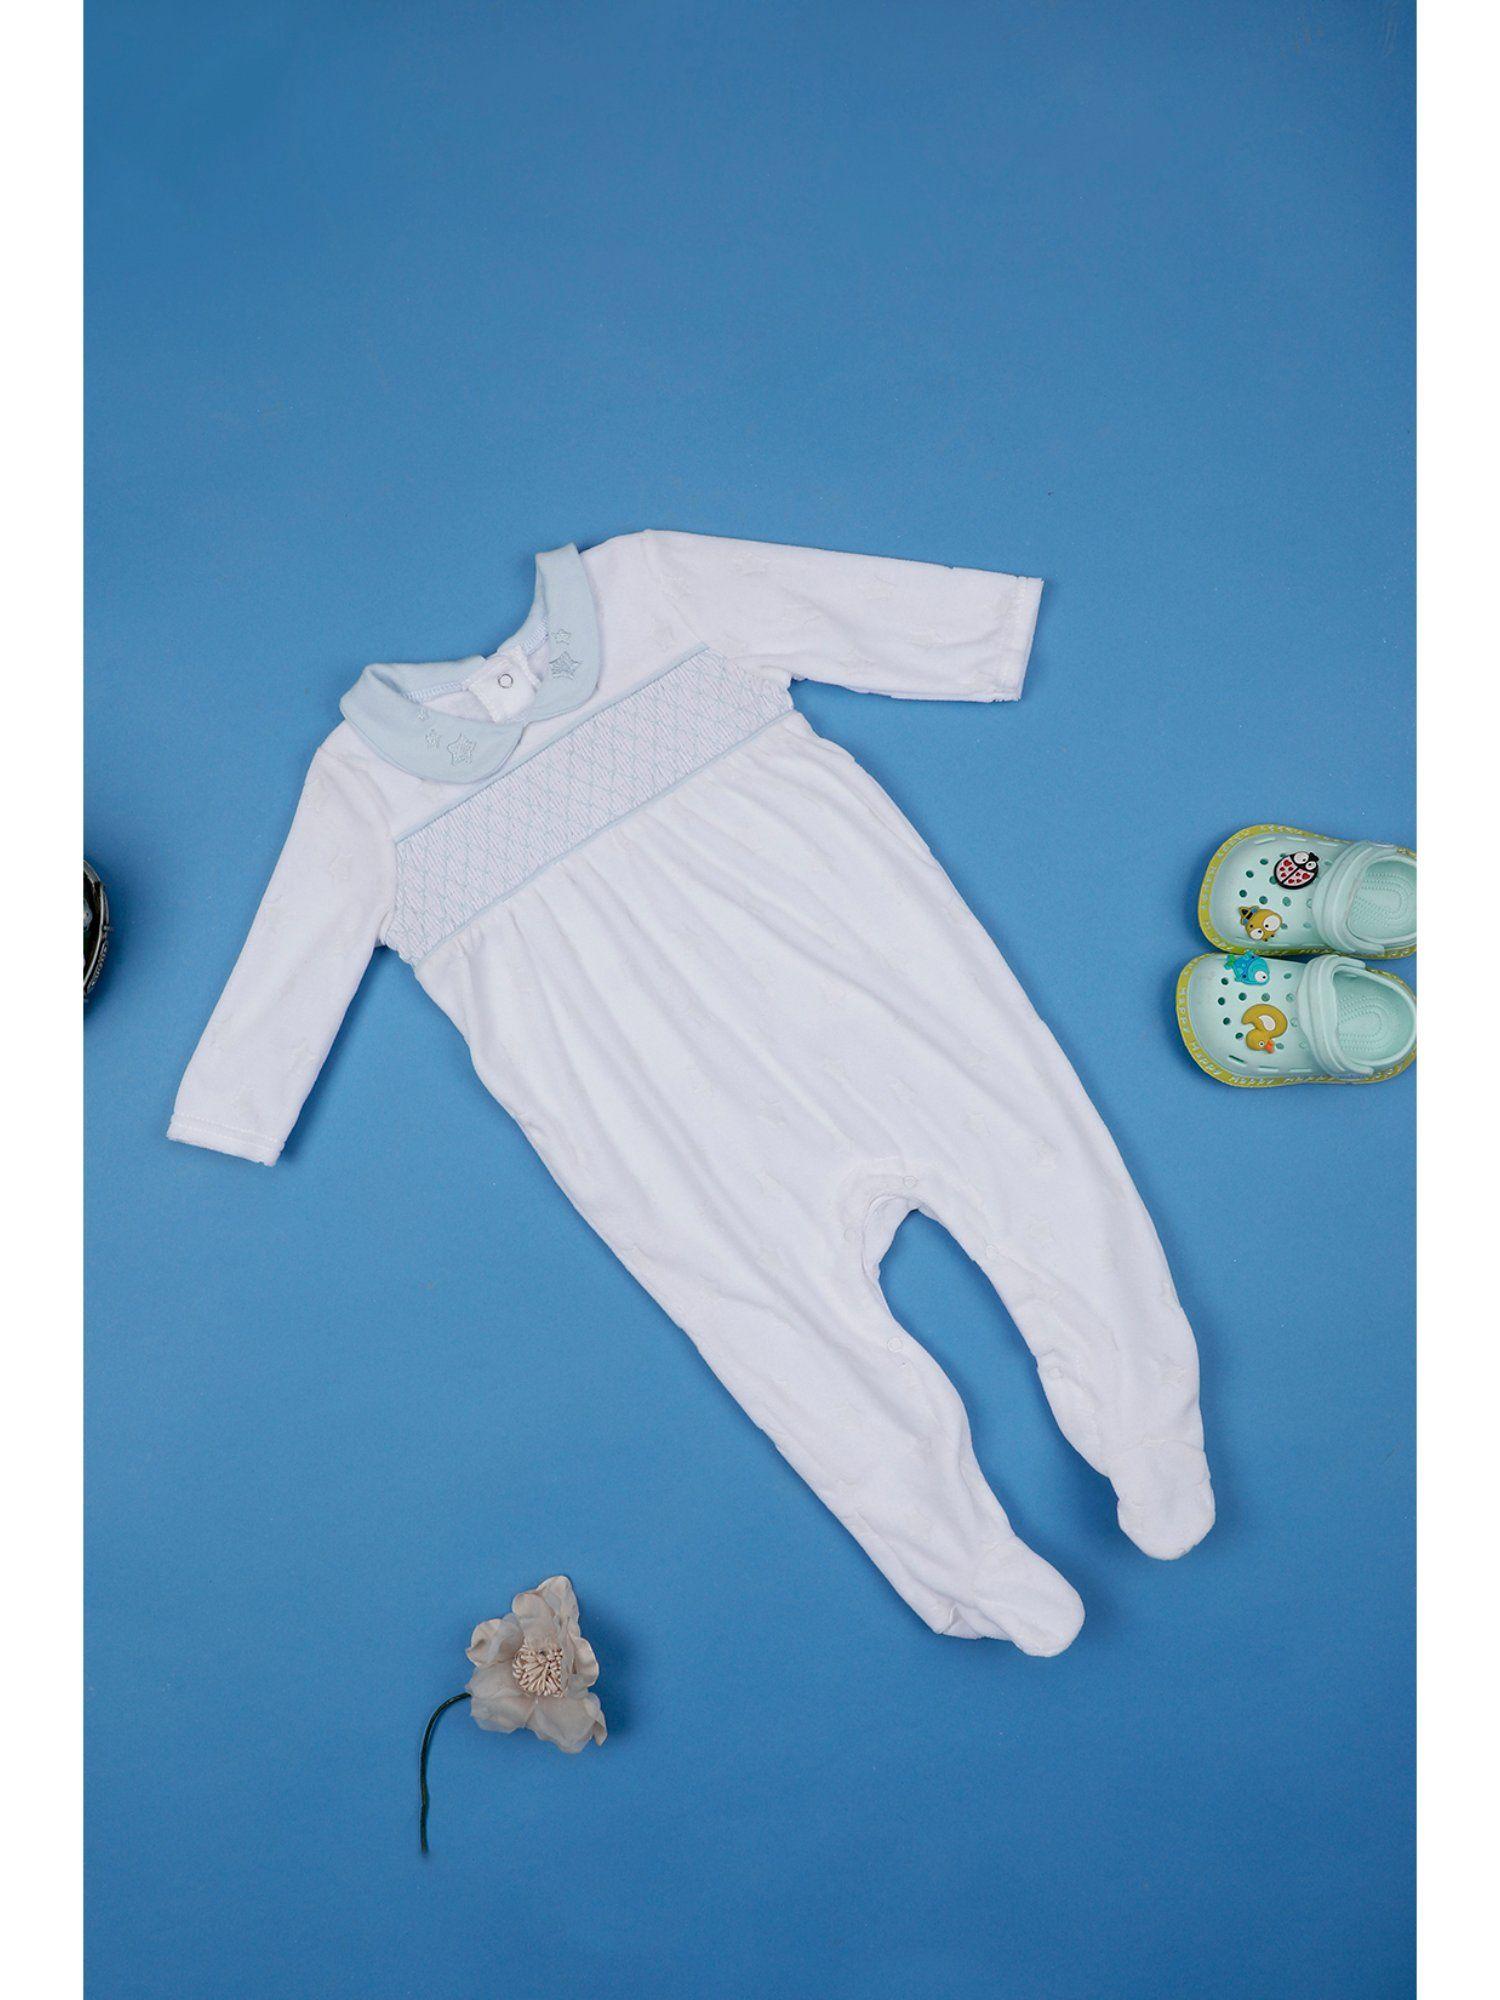 infants-girls-white-peter-pan-cotton-rompers